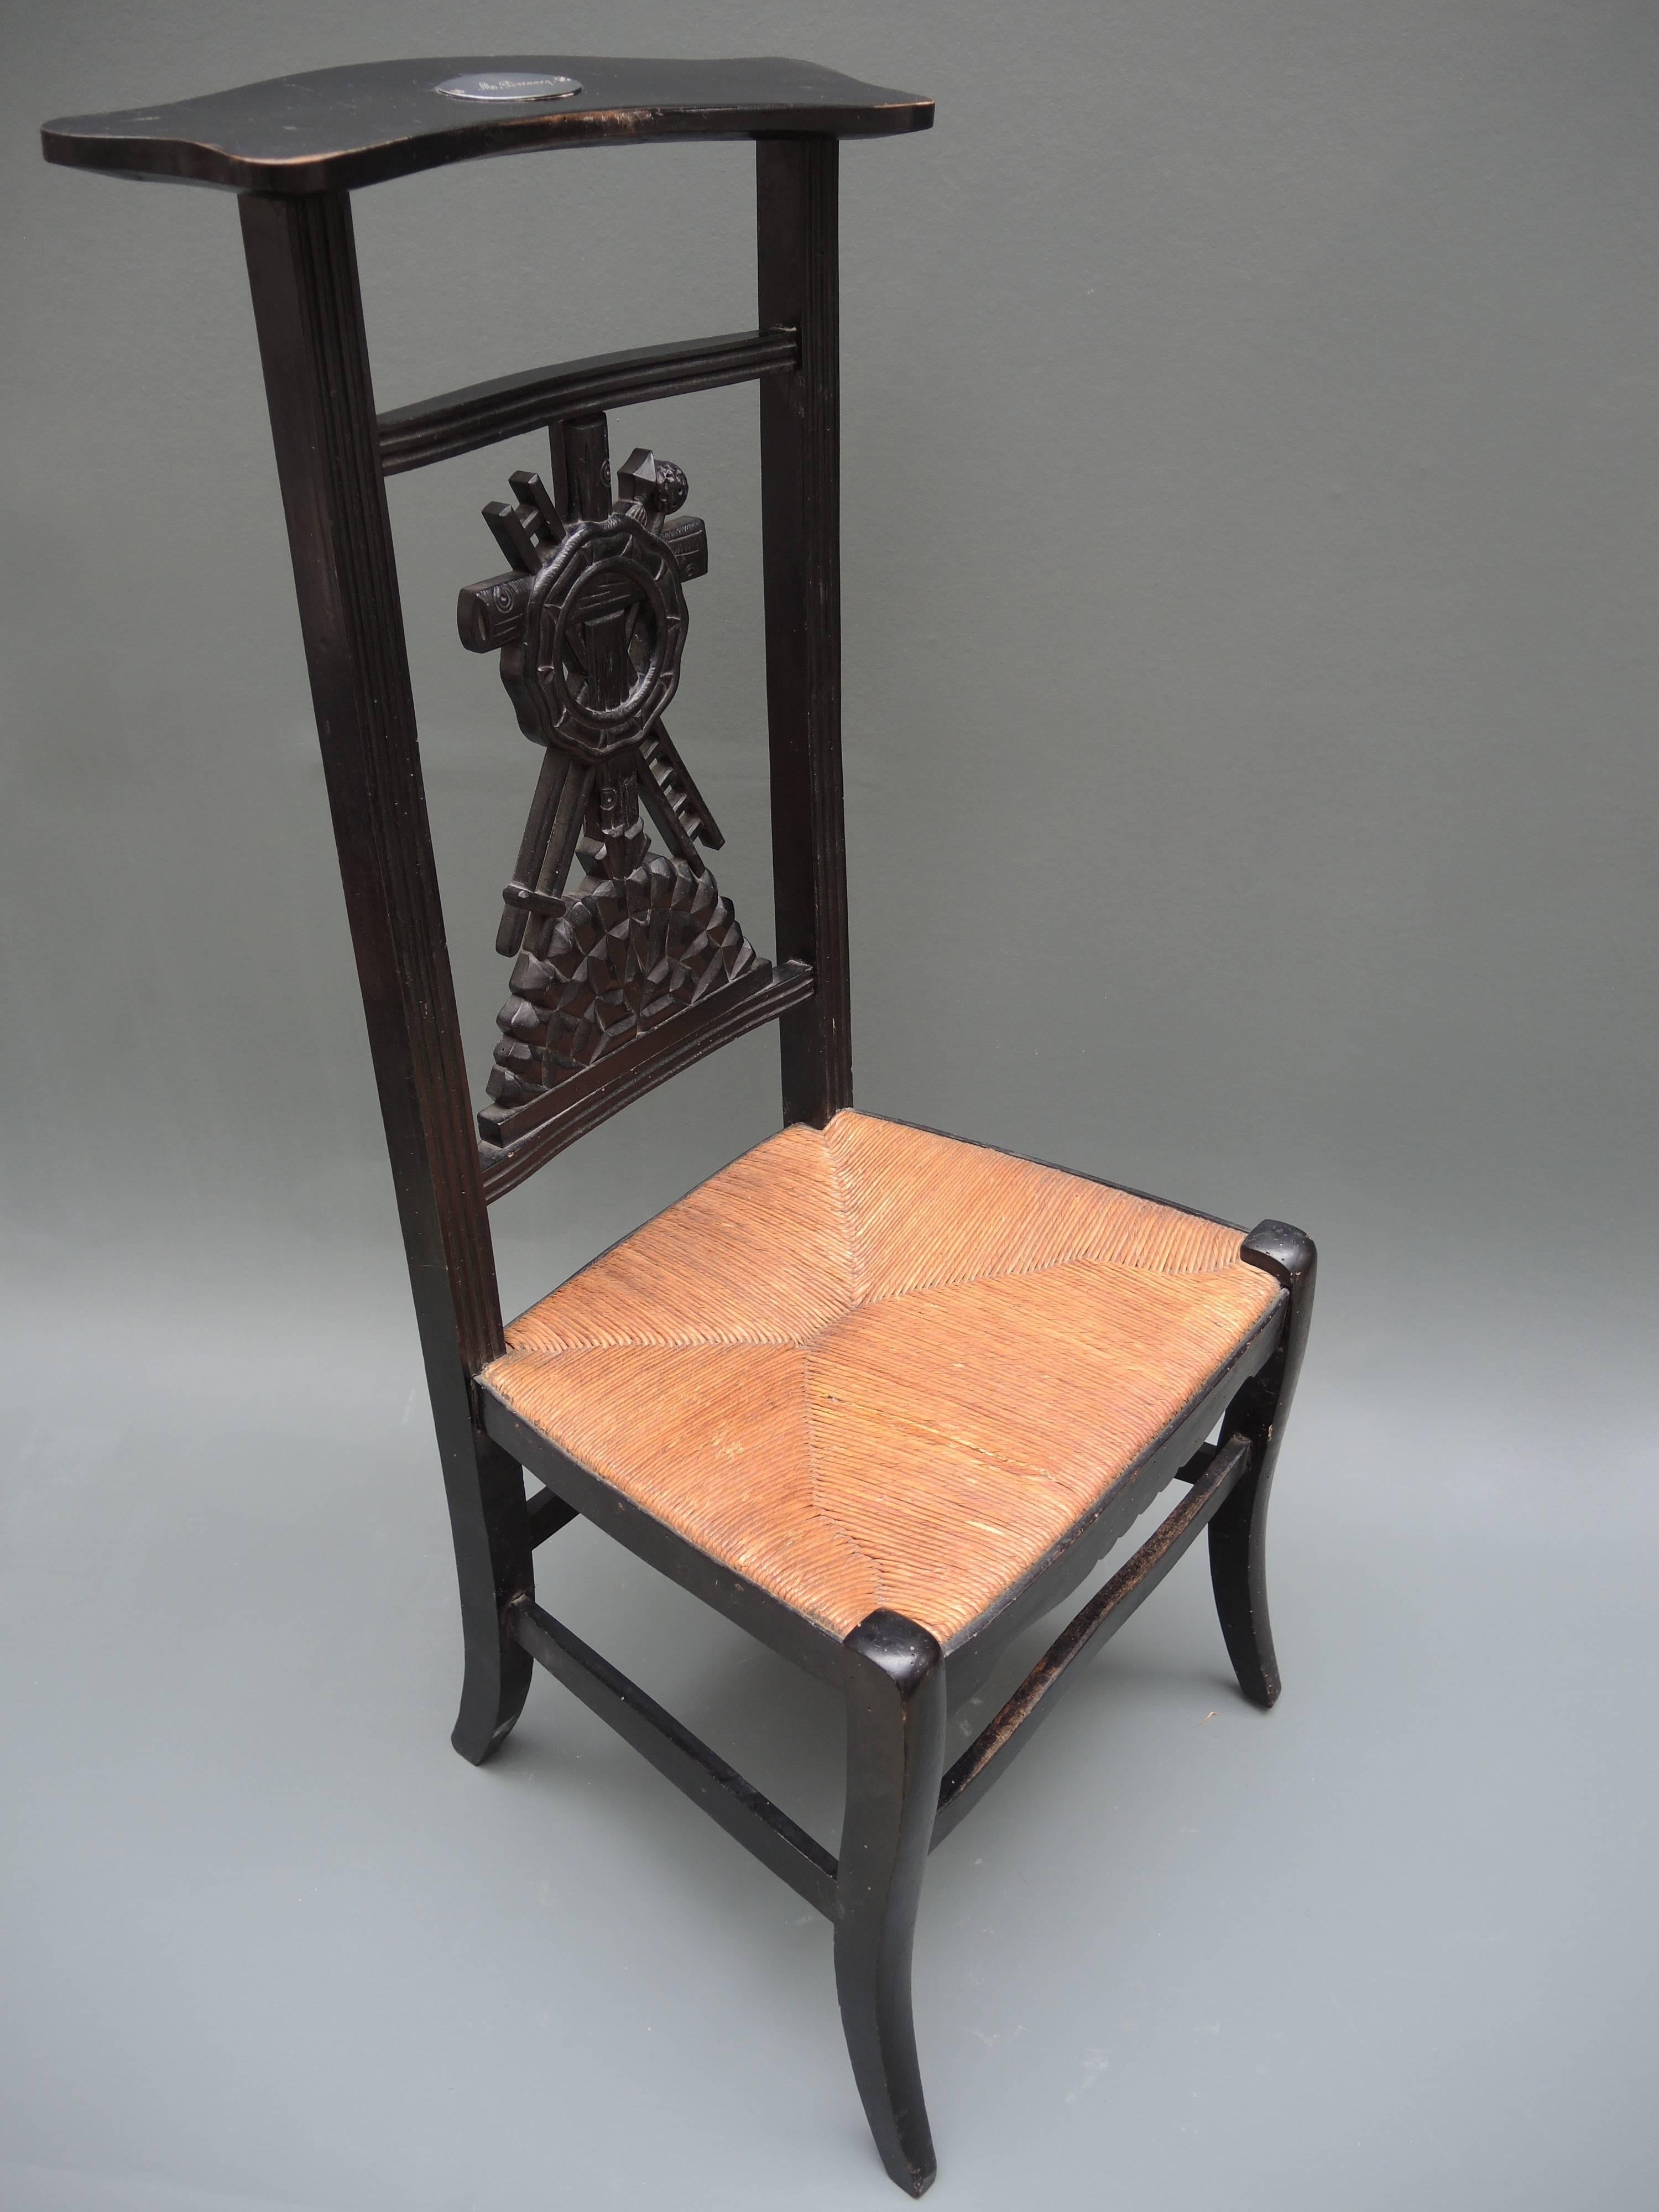 French Provincial prayer chair retaining the original rush seat and paint, circa 1840. The top prayer panel retains the engraved plaque bearing the patron's name. The back splat is hand-carved with symbols of the crucifixion of Christ.

 A wealthy